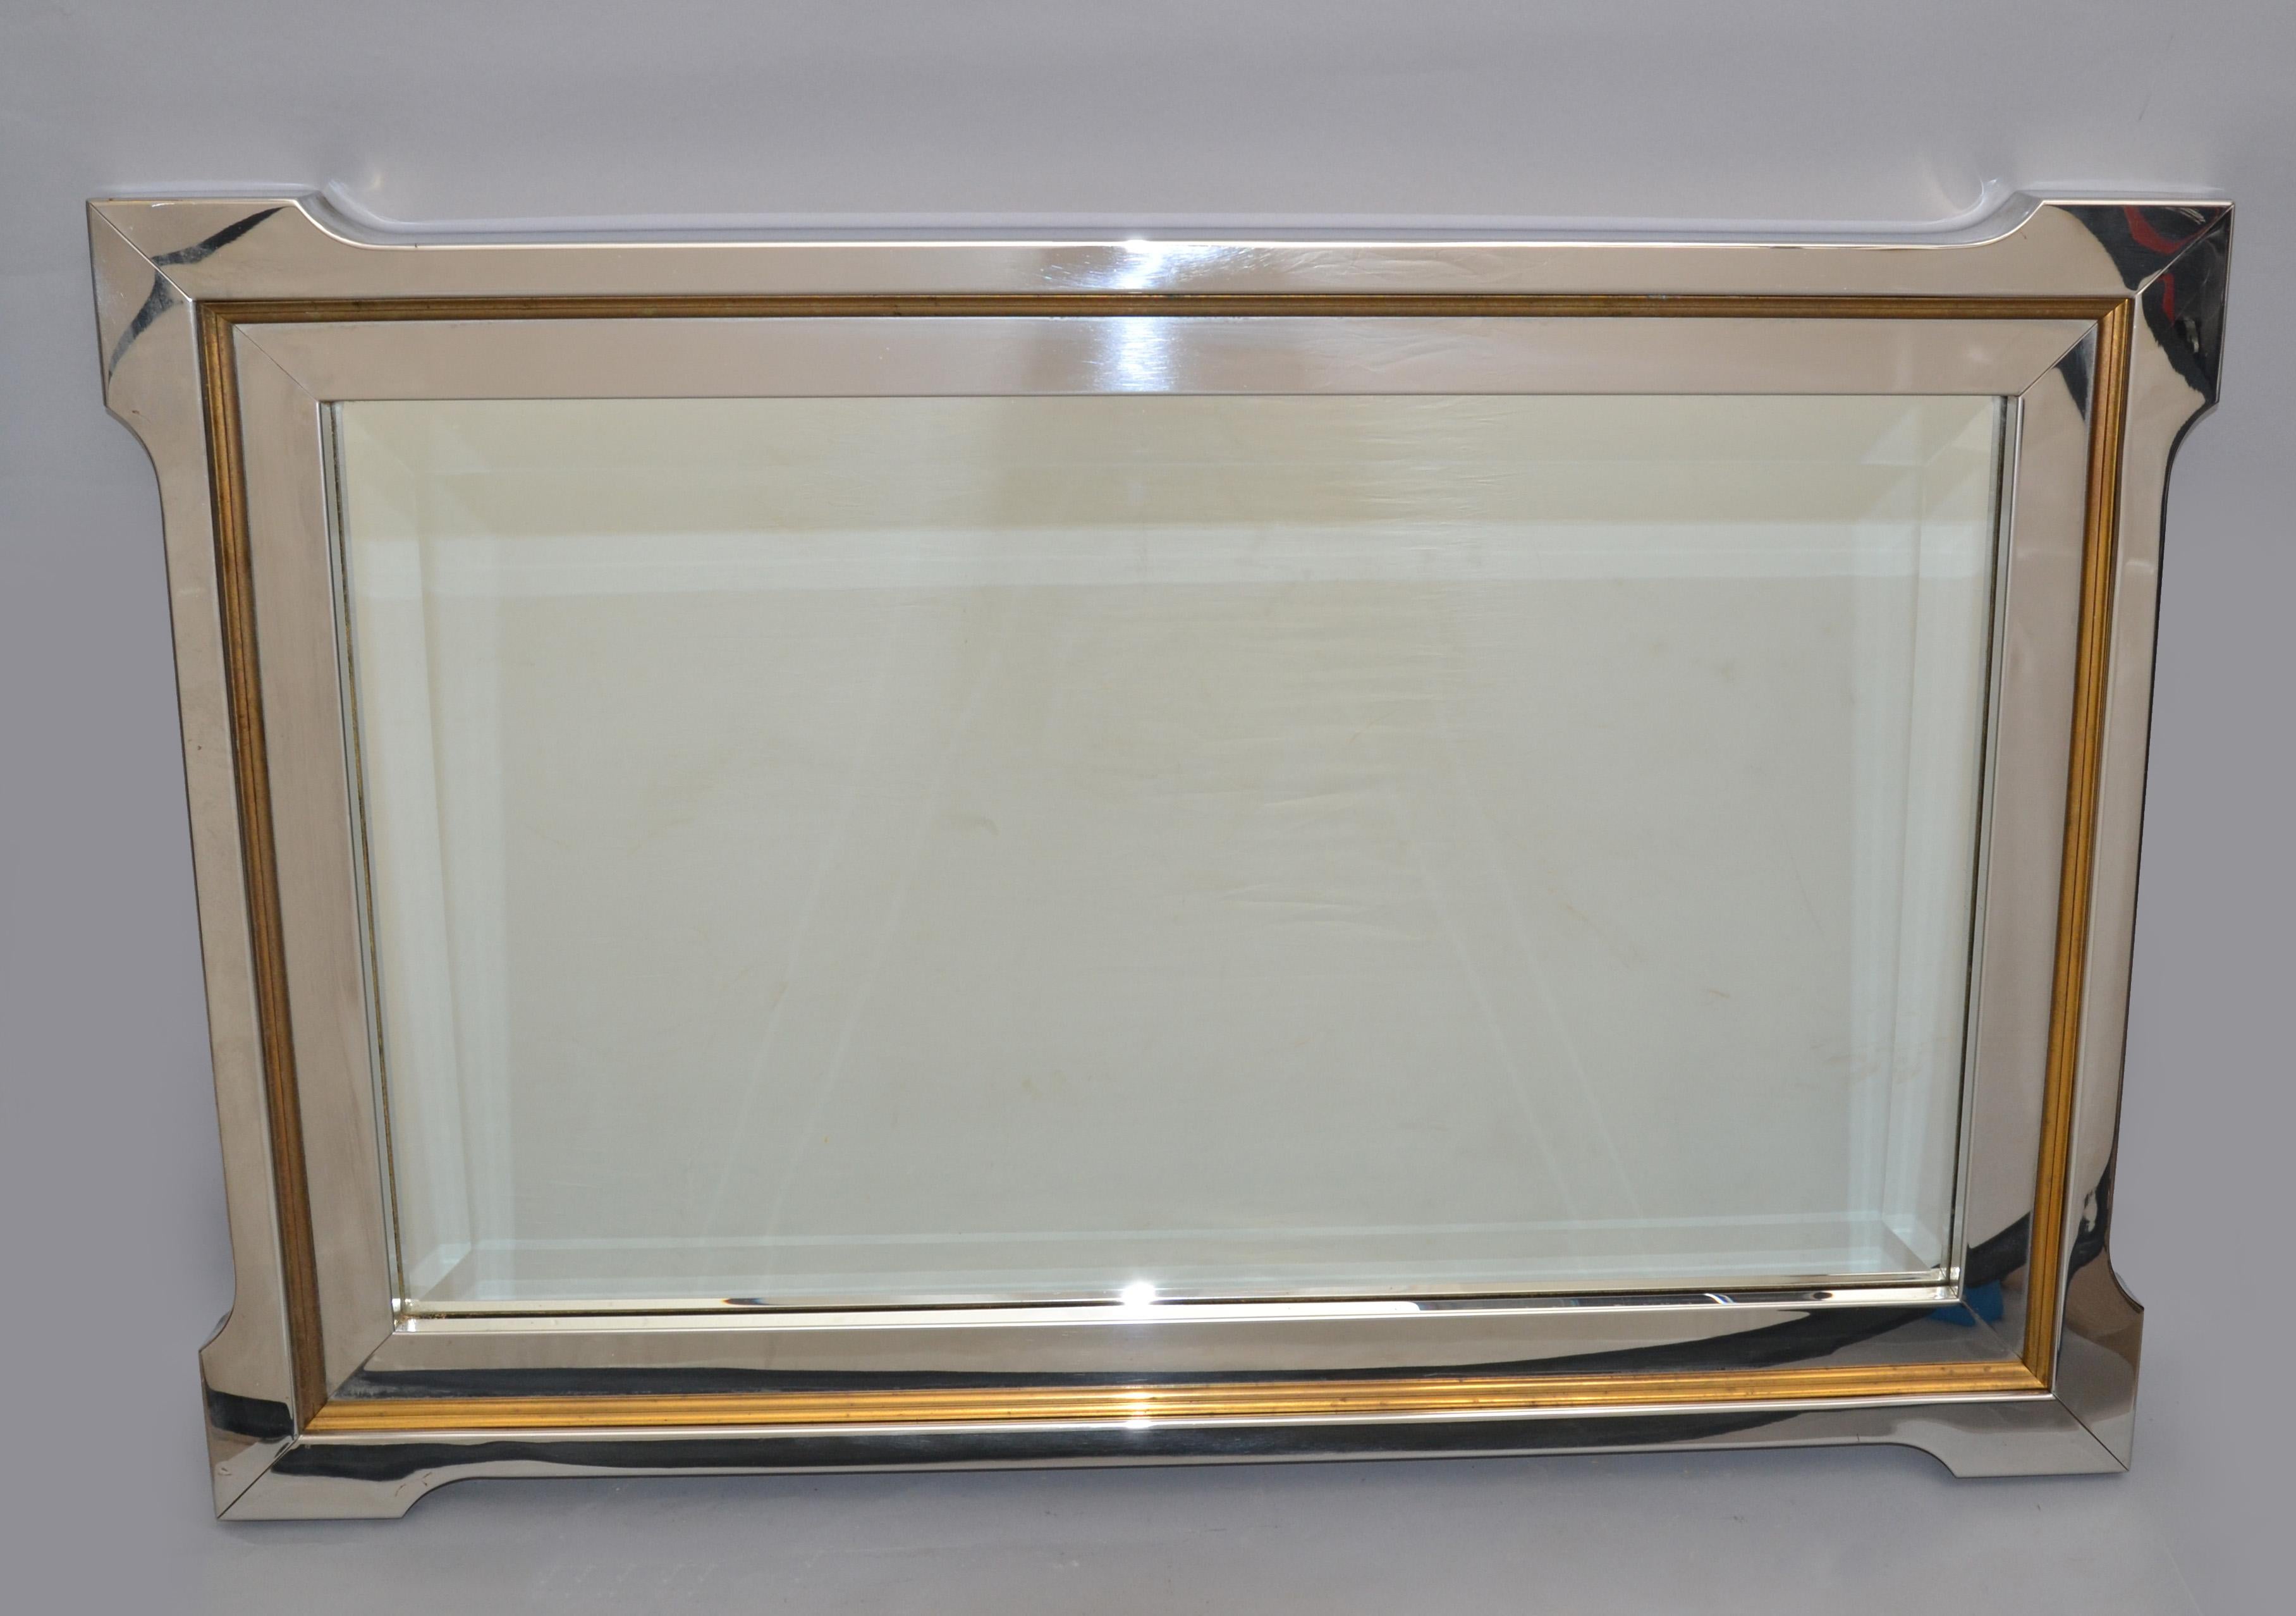 Pierre Cardin Style Mid-Century Modern Chrome, Brass & Wood beveled Wall Mirror  In Good Condition For Sale In Miami, FL